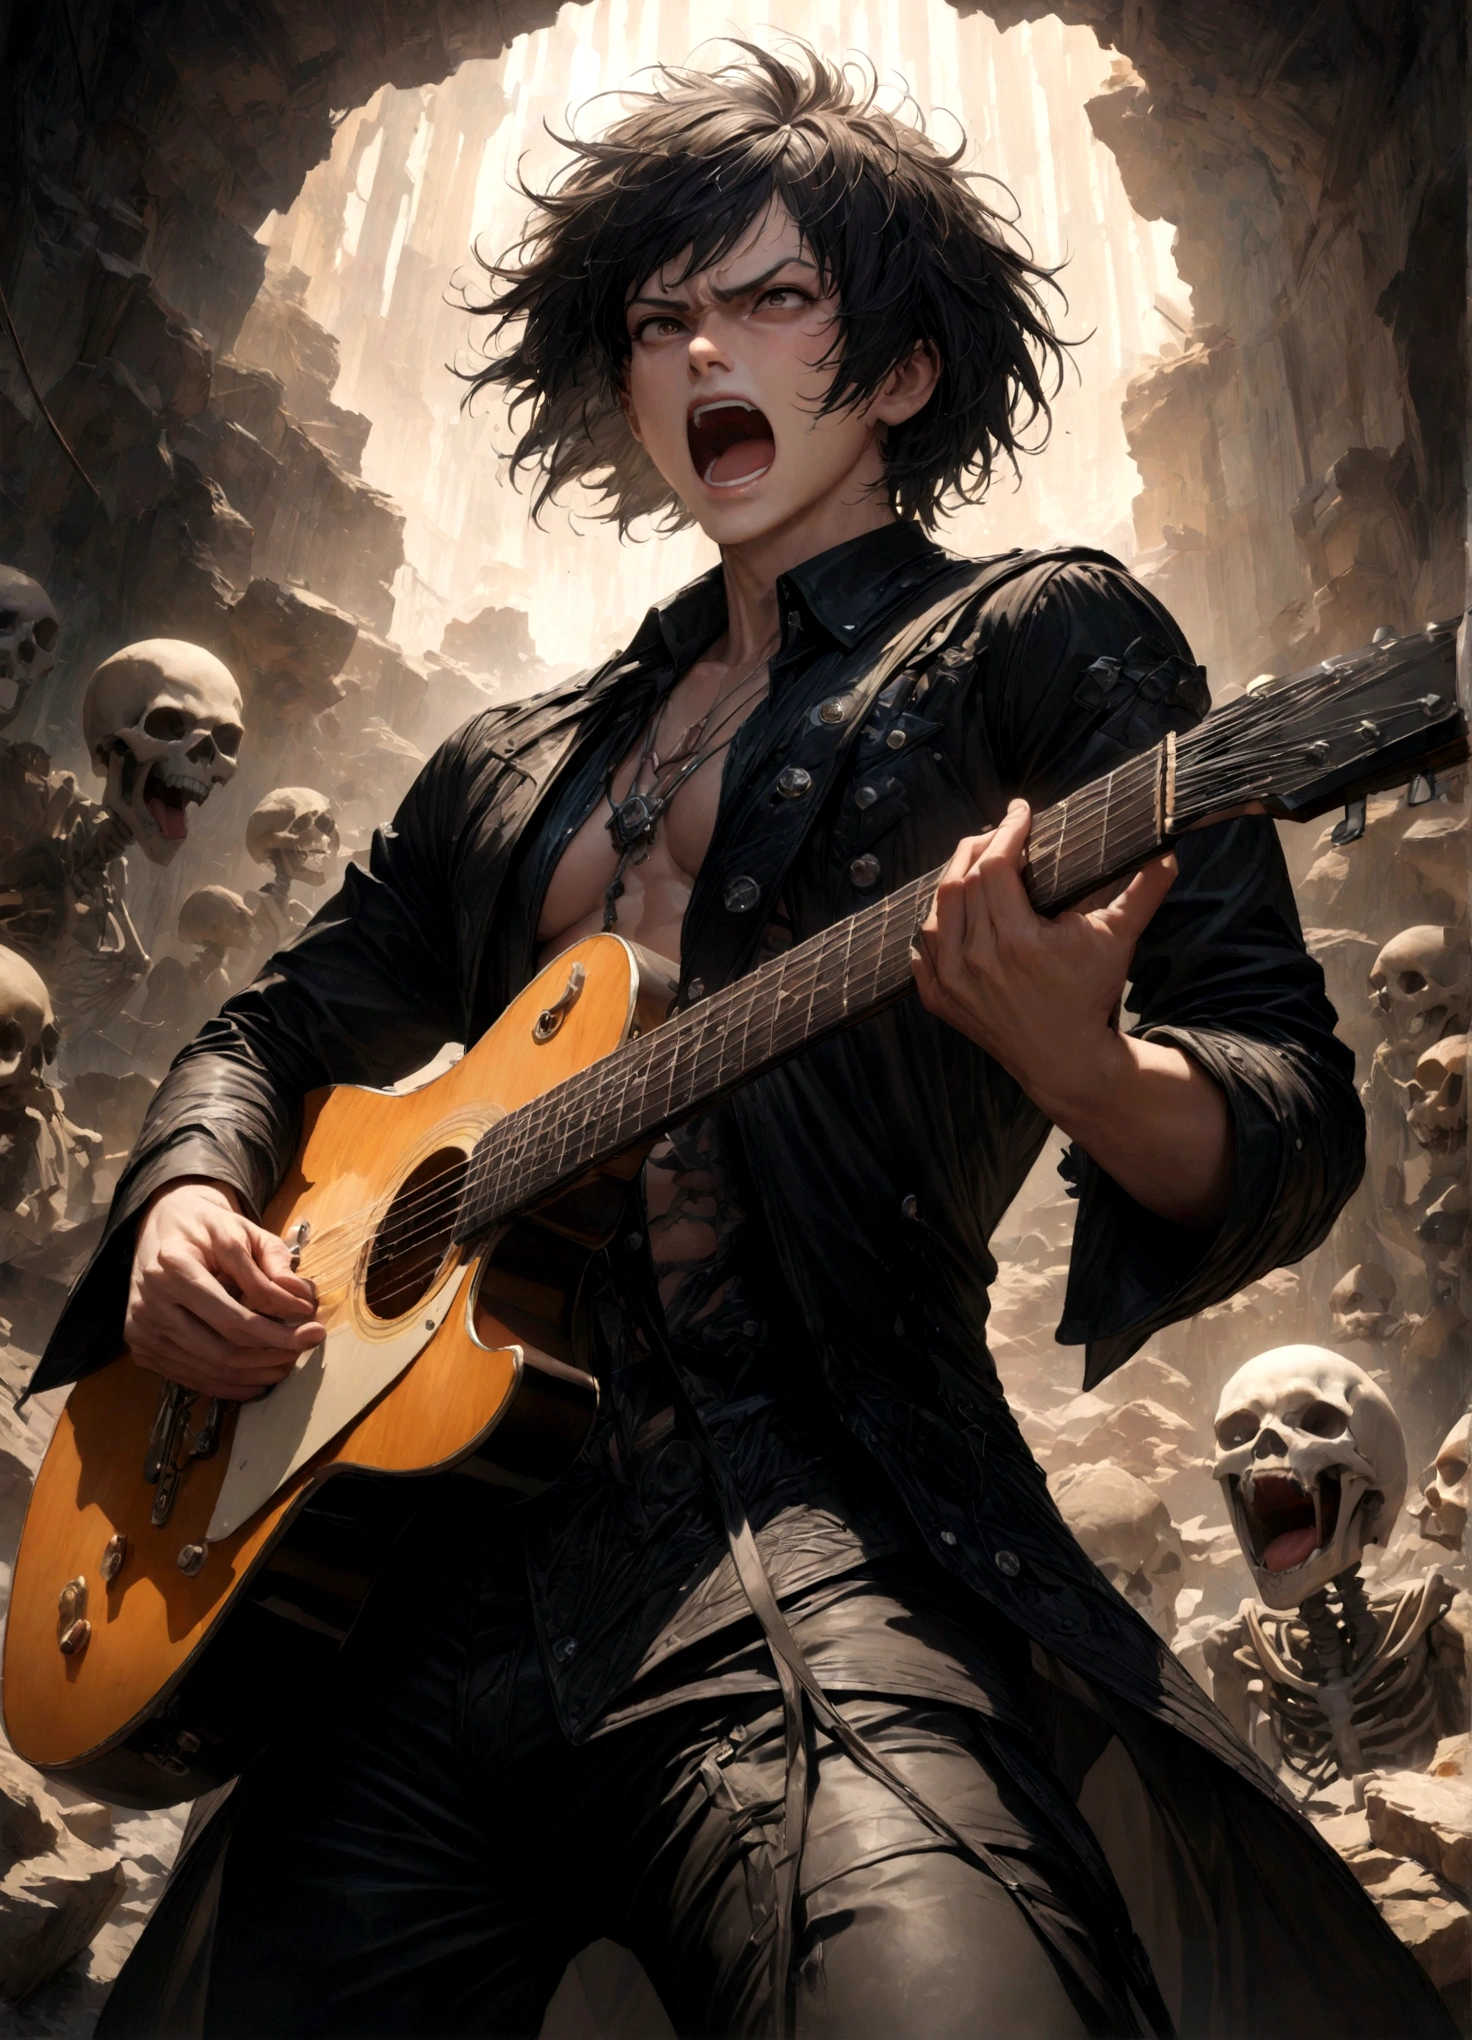 1 male,close up shot,focus on men,moderately muscular,The man is a guitarist and vocalist in a rock band.,neutral black short hair,the man is facing forward,A man is playing a black electric guitar,(masculine face),The man looks like he's half yellow and half white.,((Singing as if screaming: 1.3)),photoreal,Black rock musician costume details,angry face,suffering,sorrow,anatomically correct,(masterpiece:1.3),(highest quality:1.4),(ultra detailed:1.5),High resolution,extremely detailed,unity 8k wallpaper,draw artistic background,(Draws an abstract and decadent image in the dark,with a large number of gray skeletons and colorful musical notes),(Please vary the size of the notes to create a sense of perspective),beautiful light and shadow,This image is a rock music poster,Please draw the man carefully and intricately.,dark fantasy,intricate details,unbelievably absurd,energetic,rock,cool,punk rock or hardcore music,concert venue lighting,BREAK,Black rock musician costume details,(masterpiece:1.3),(highest quality:1.4),(ultra detailed:1.5)